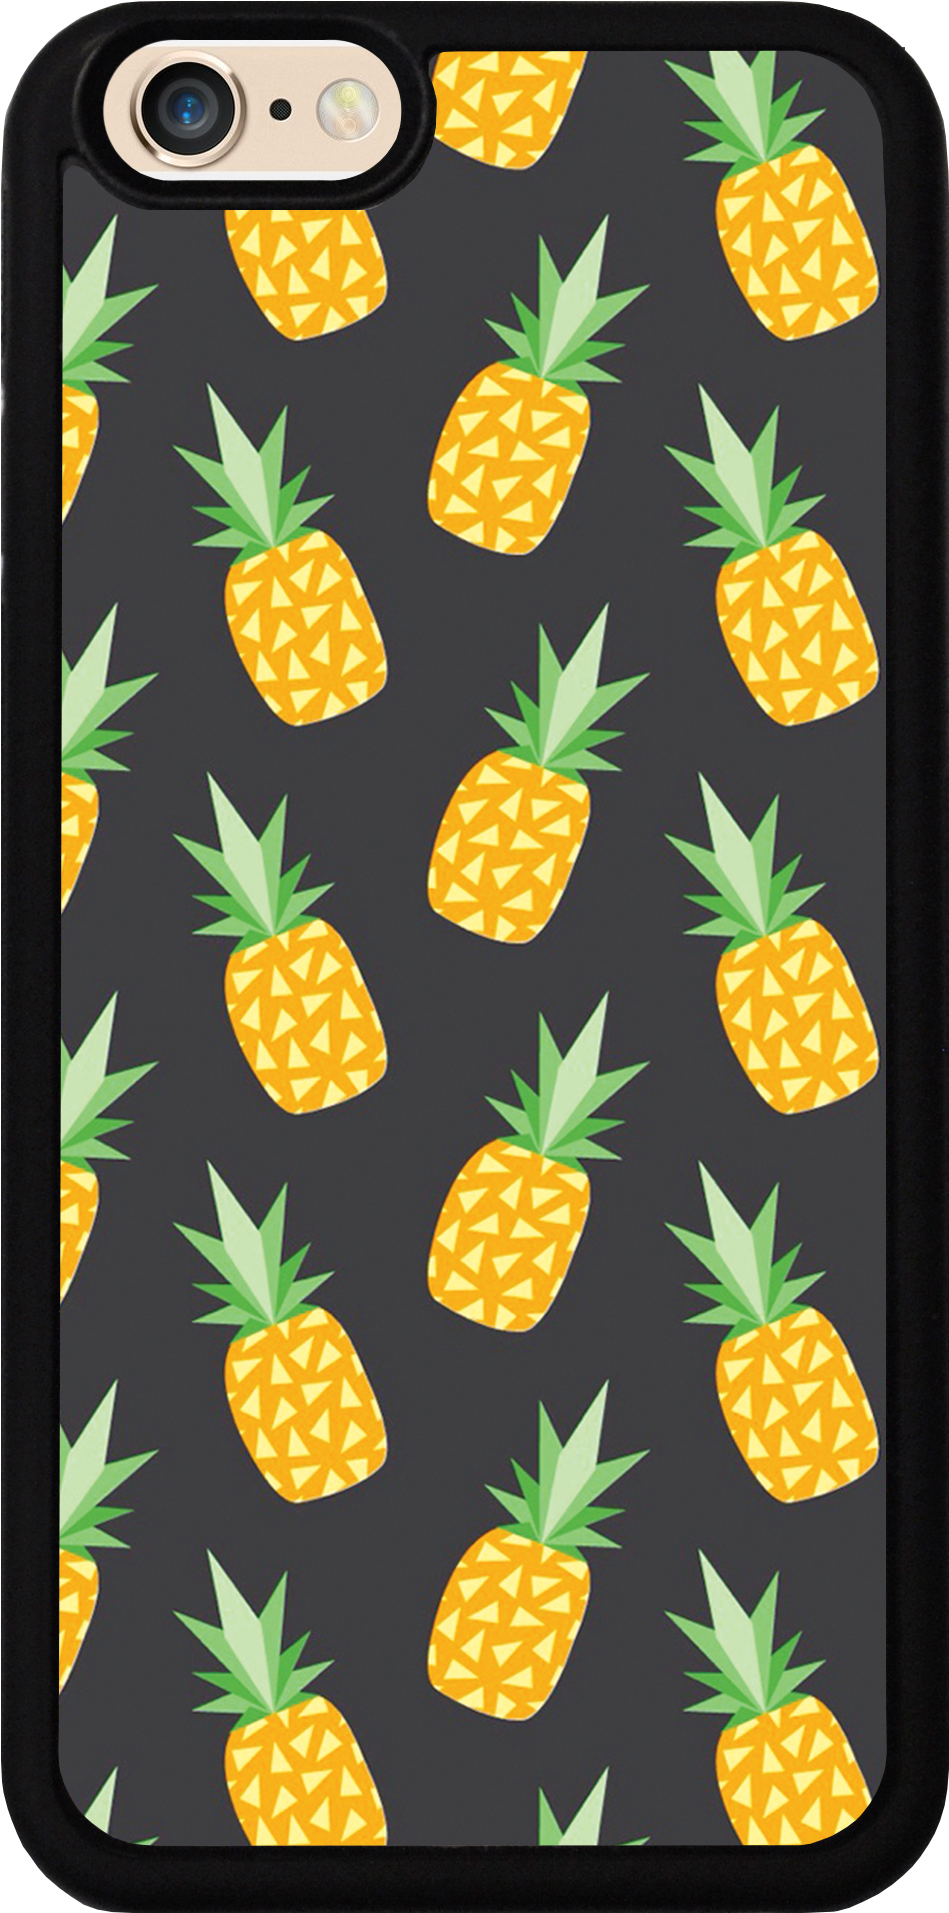 Download Pineapple Case - Fruits Wallpaper Lock Screen Hd PNG Image with No  Background 